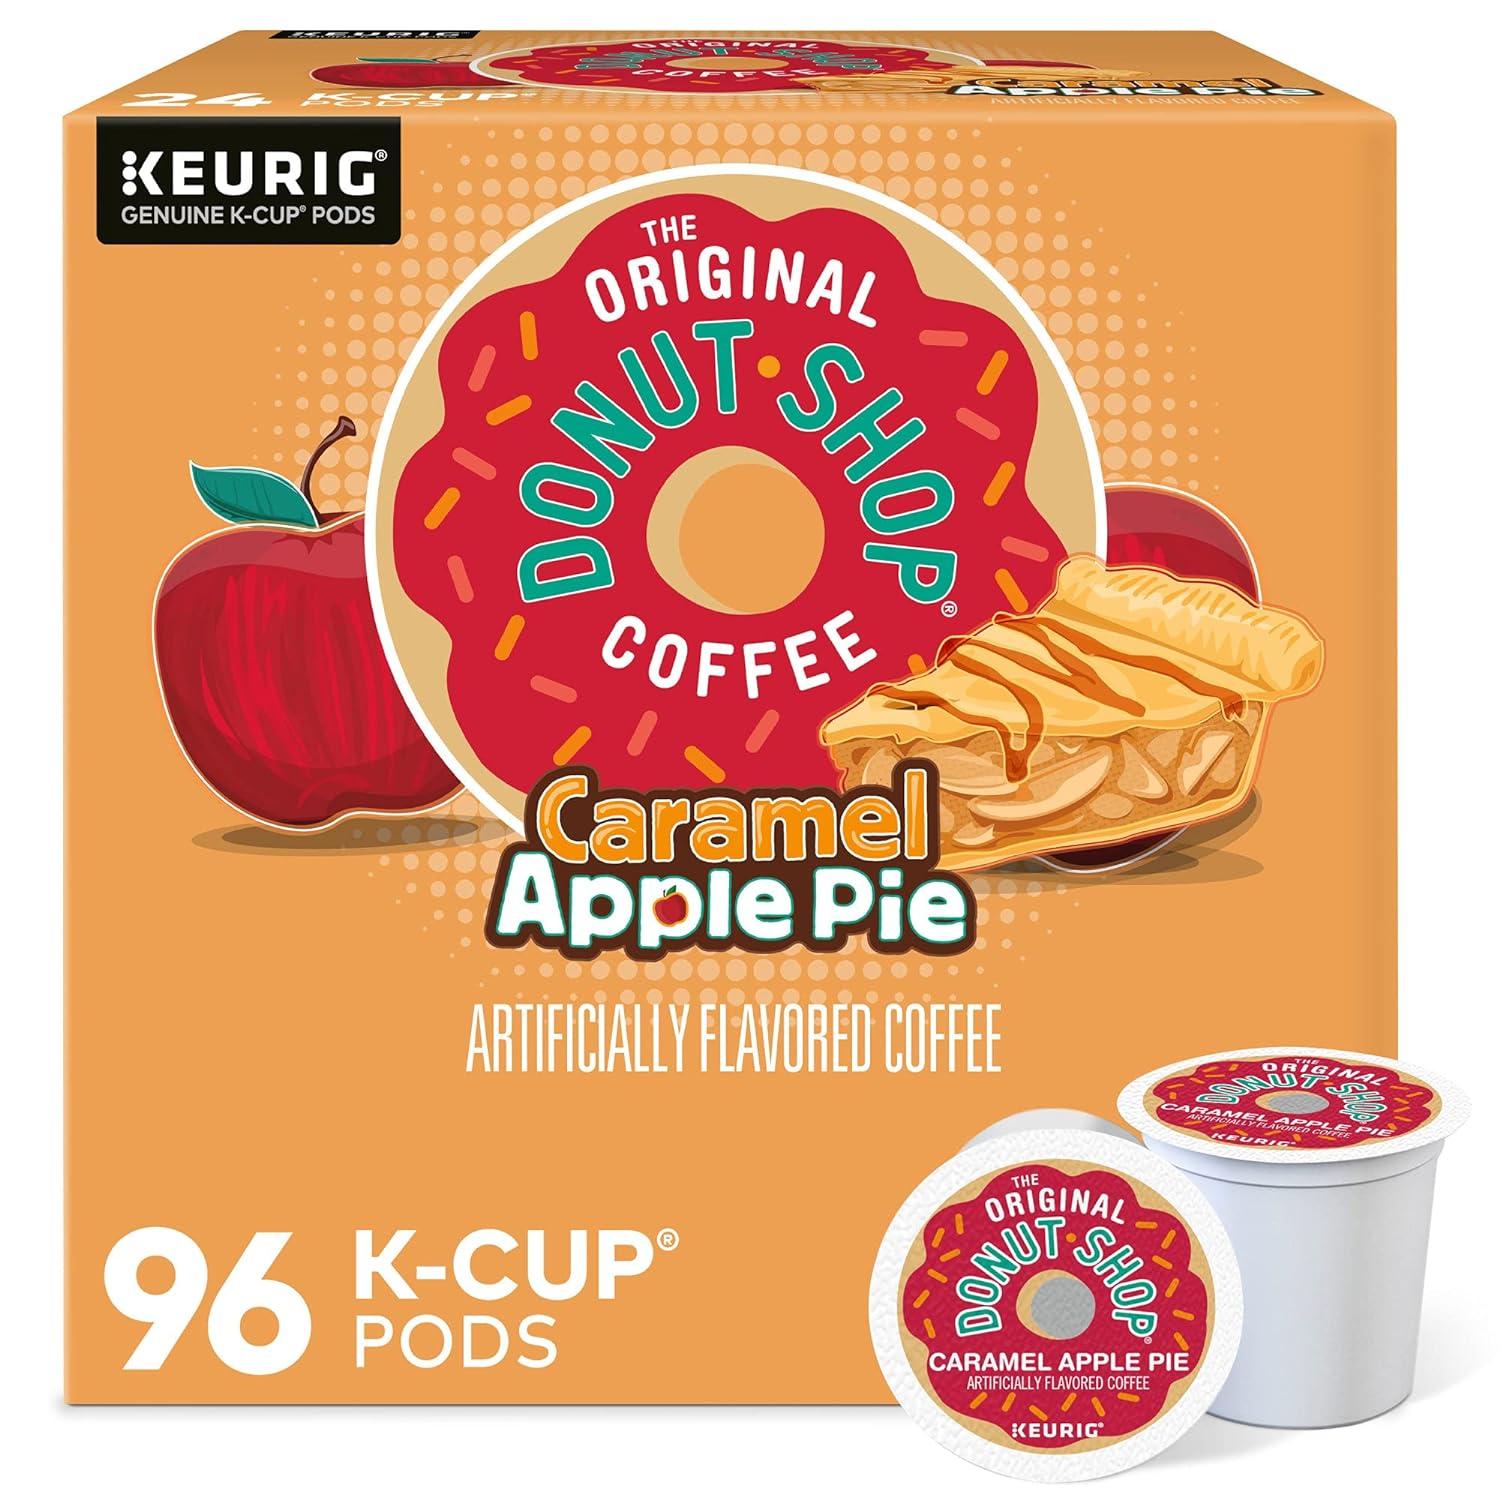 The Original Donut Shop Light Roast K-Cup Coffee Pods 96 Pack for $20.14